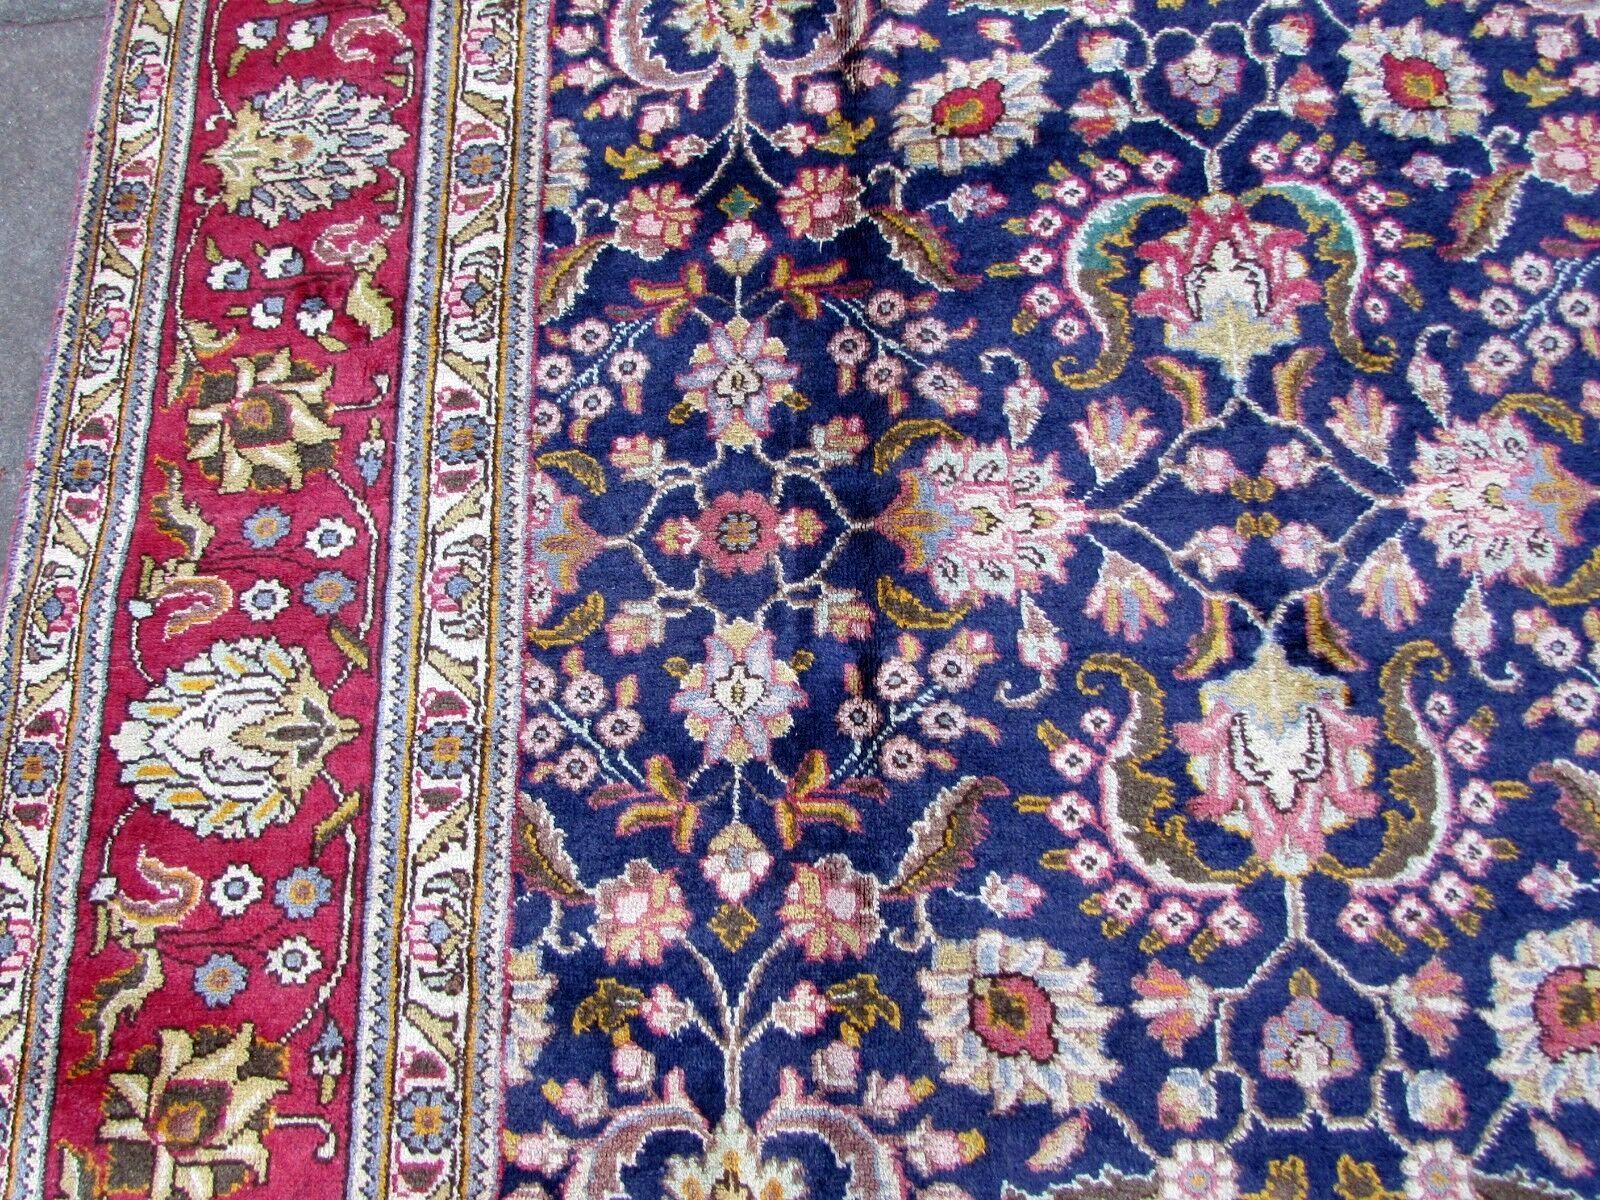 Handmade vintage Mashad rug in traditional floral design and indigo wool. The rug is from the end of 20th century in original good condition.

-condition: original good,

-circa 1970s,

-size: 9.5' x 12.7' (291cm x 389cm),

-material: